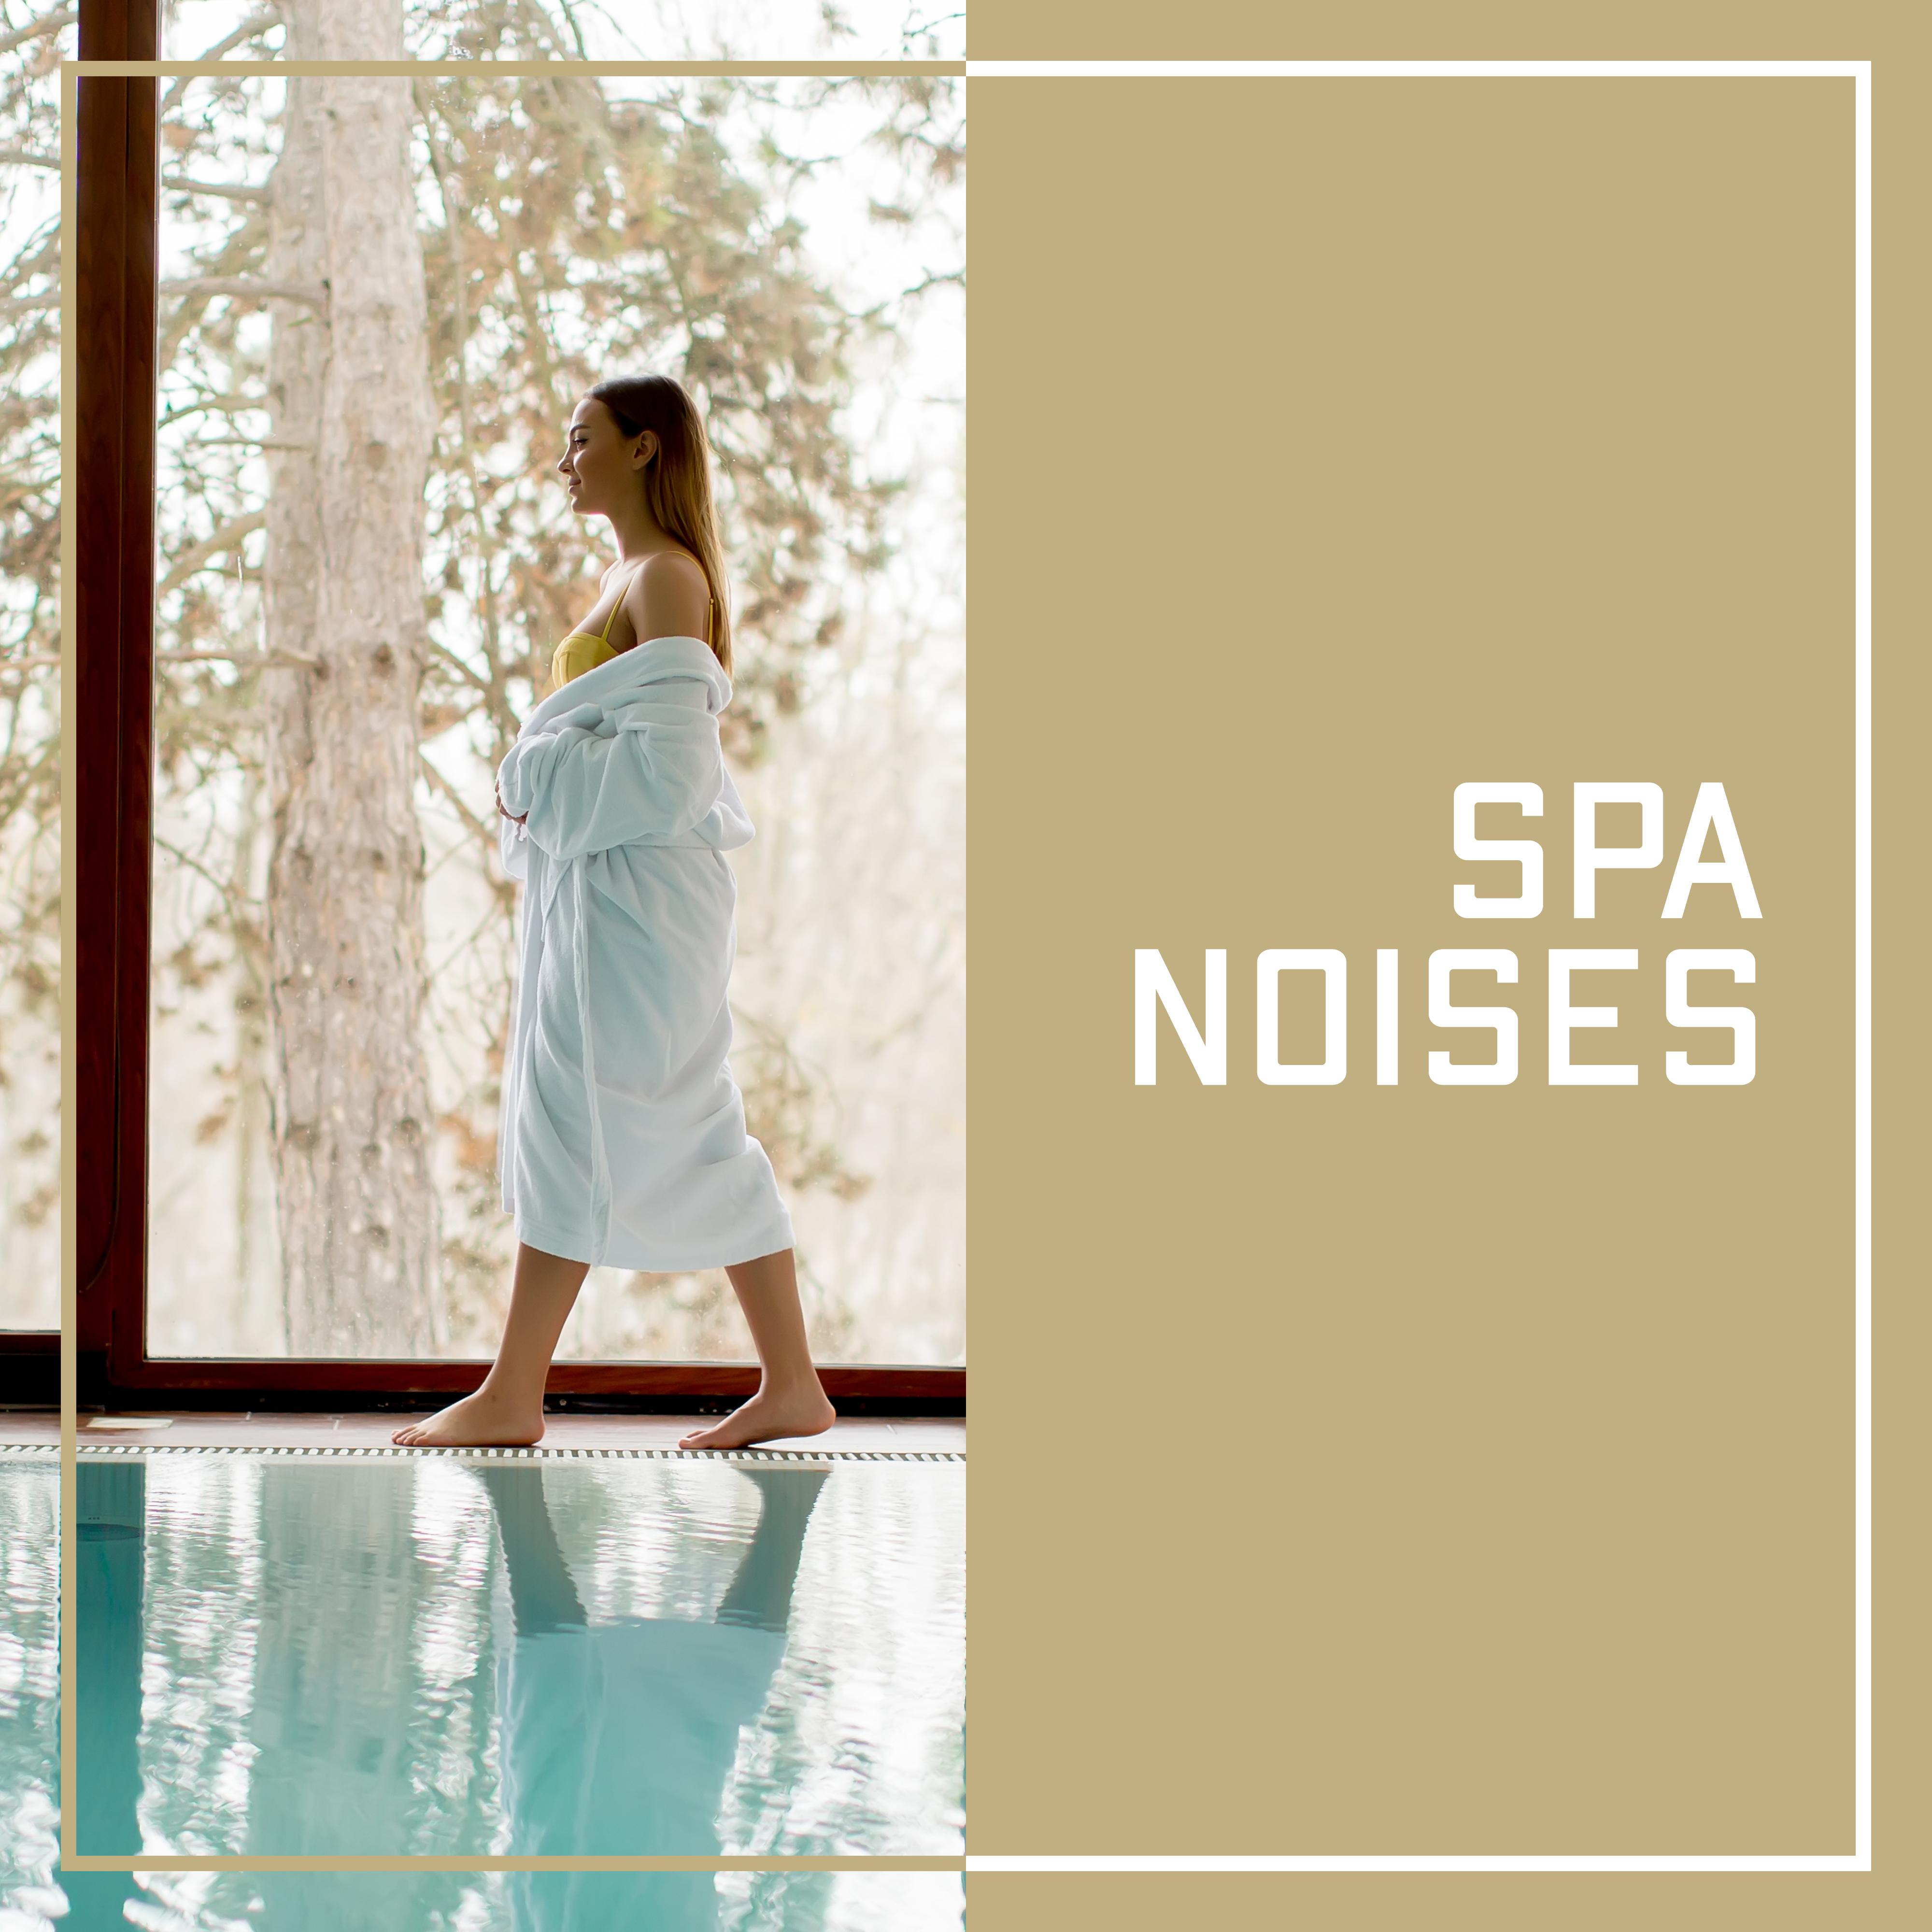 SPA Noises  Relaxing Sounds for Spa, Wellness, Massage, Deep Harmony, Pure Relaxation, Relaxing Music Therapy, Zen Spa